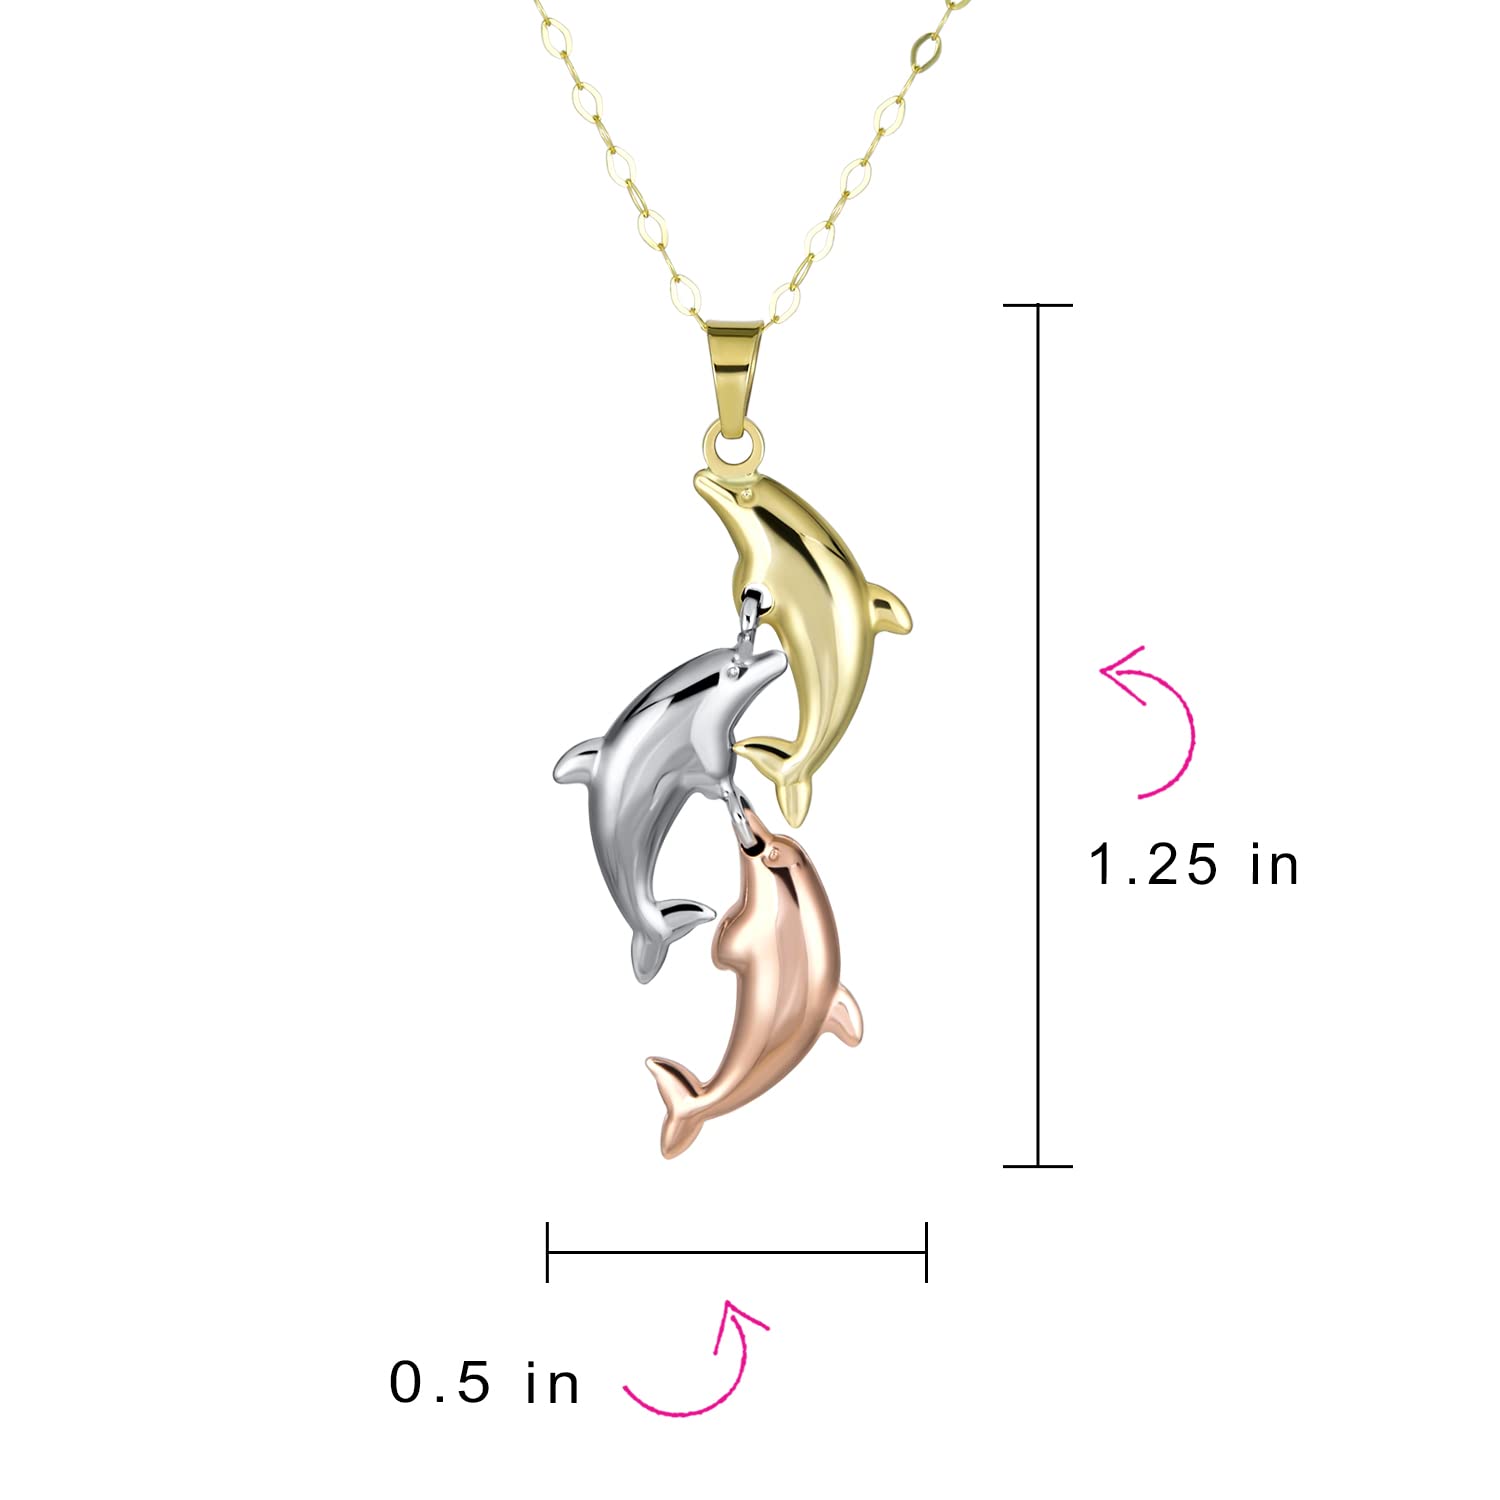 Bling Jewelry Small Danity Vacation Real 14K Yellow Gold Nautical Trio Sea Life Fish Charm 3 Family Sea Fish Dolphin Pendant Necklace For Women Teens No Chain